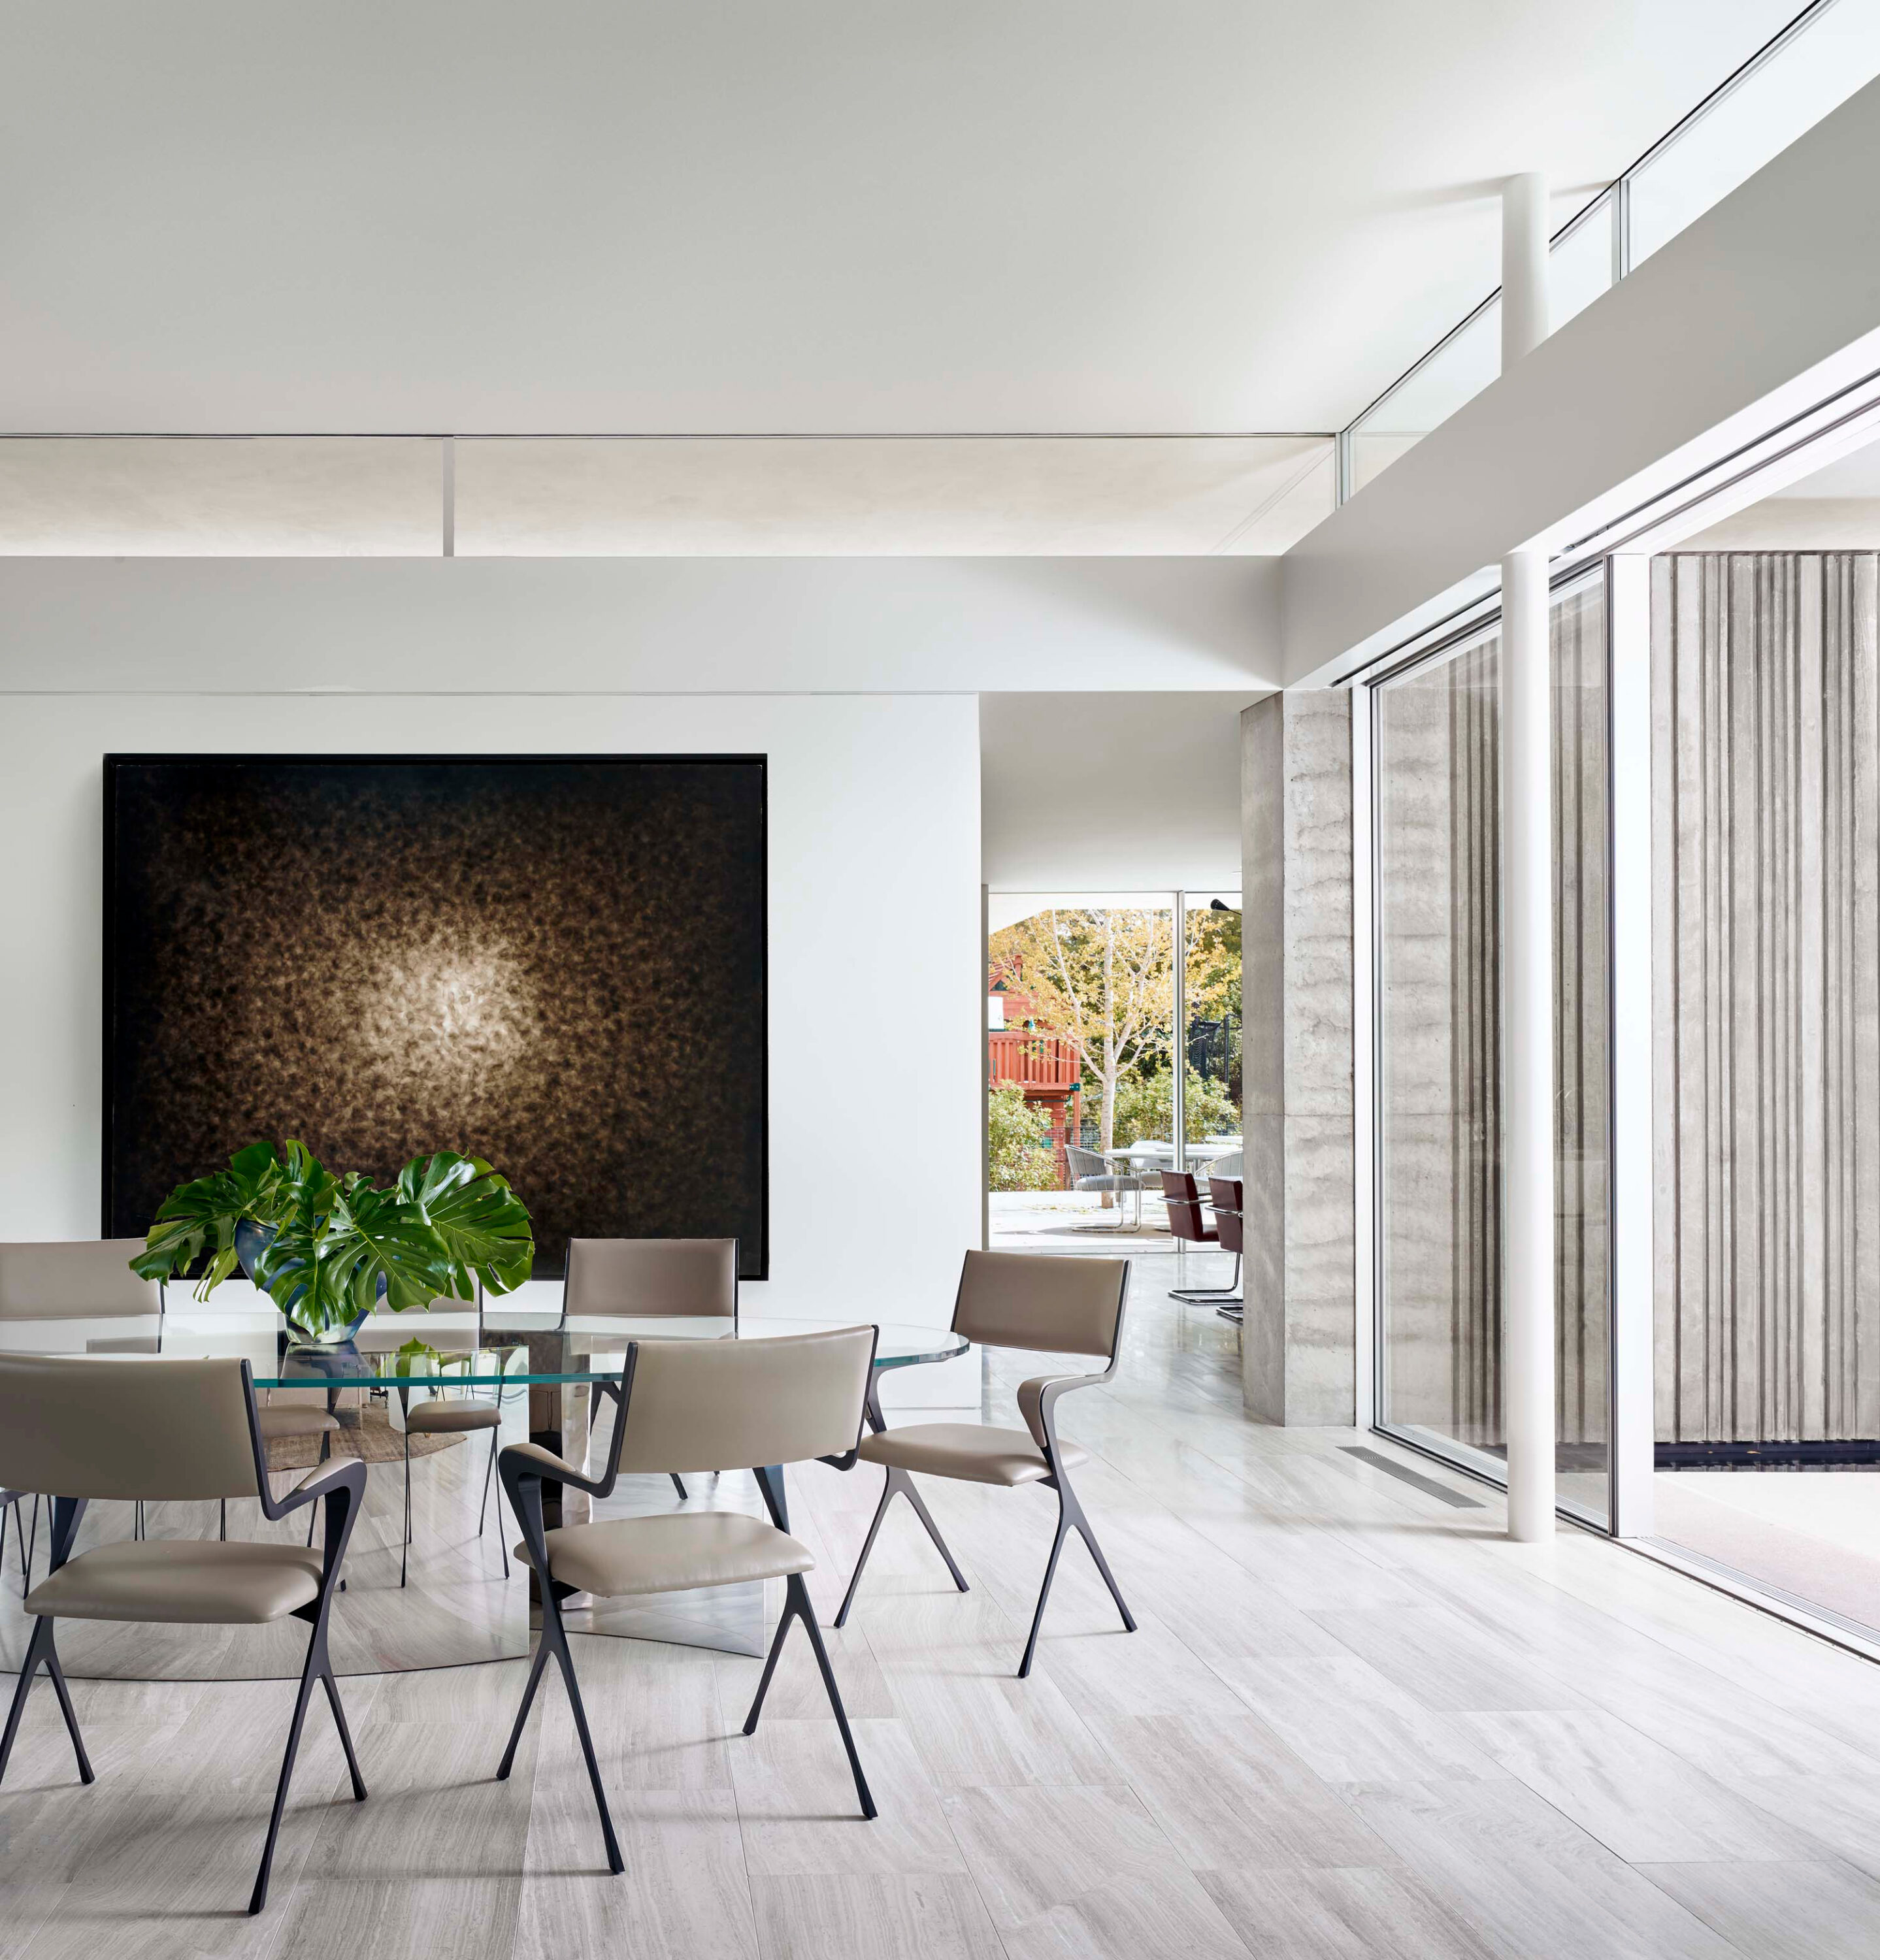 Interior photo of the Preston Hollow Residence by Specht Novak Architects. Shot by Manolo Langis, featuring a dinning area with sliding floor to ceiling glass doors and a hallway towards living area.